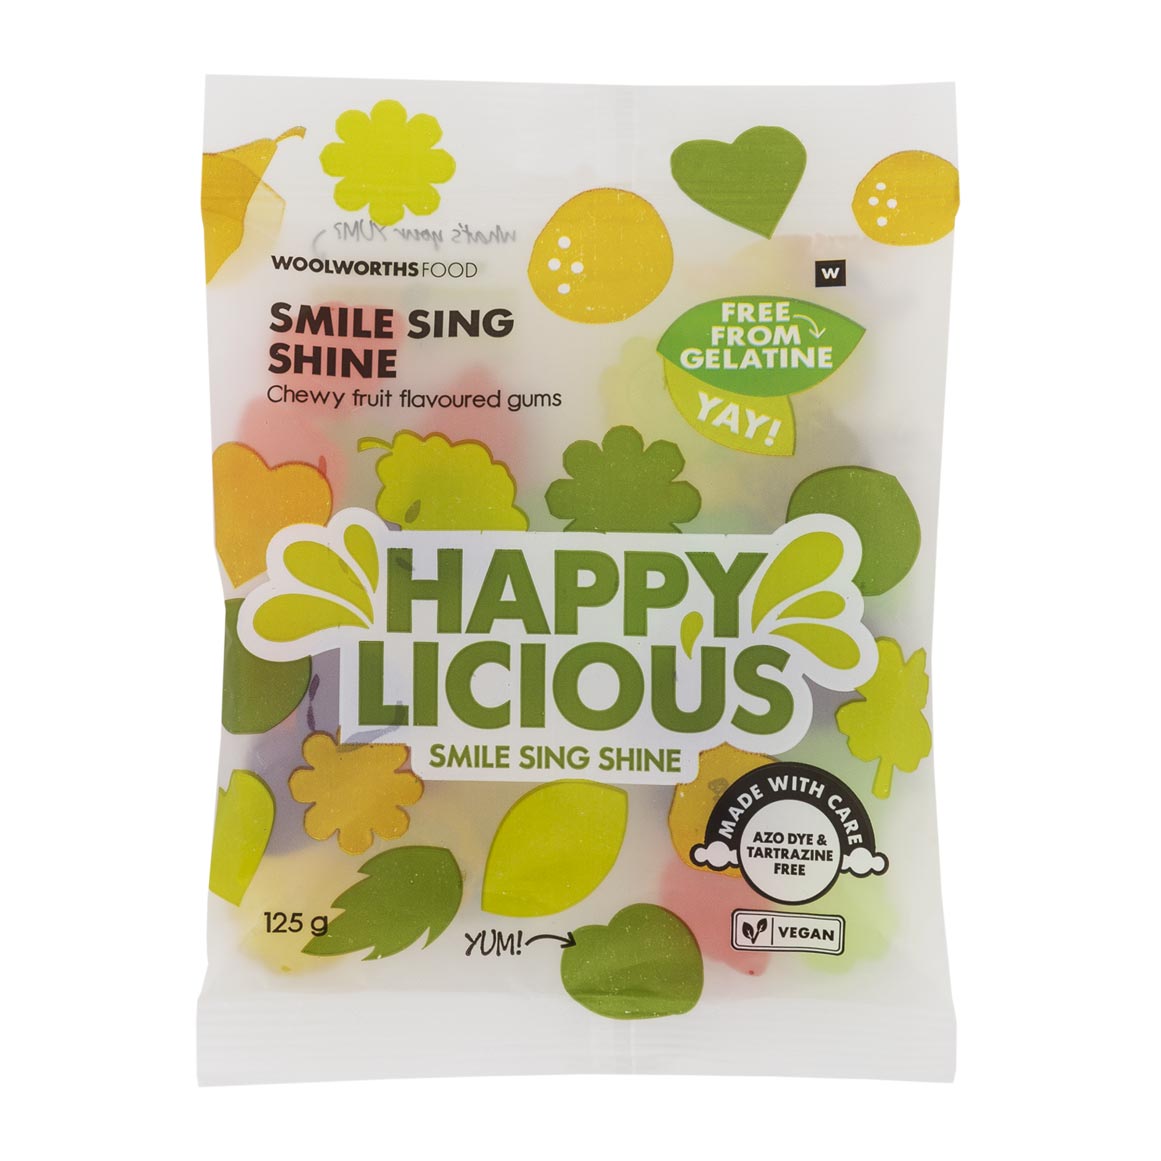 WOOLWORTHS HAPPY HHH GUMS 125G